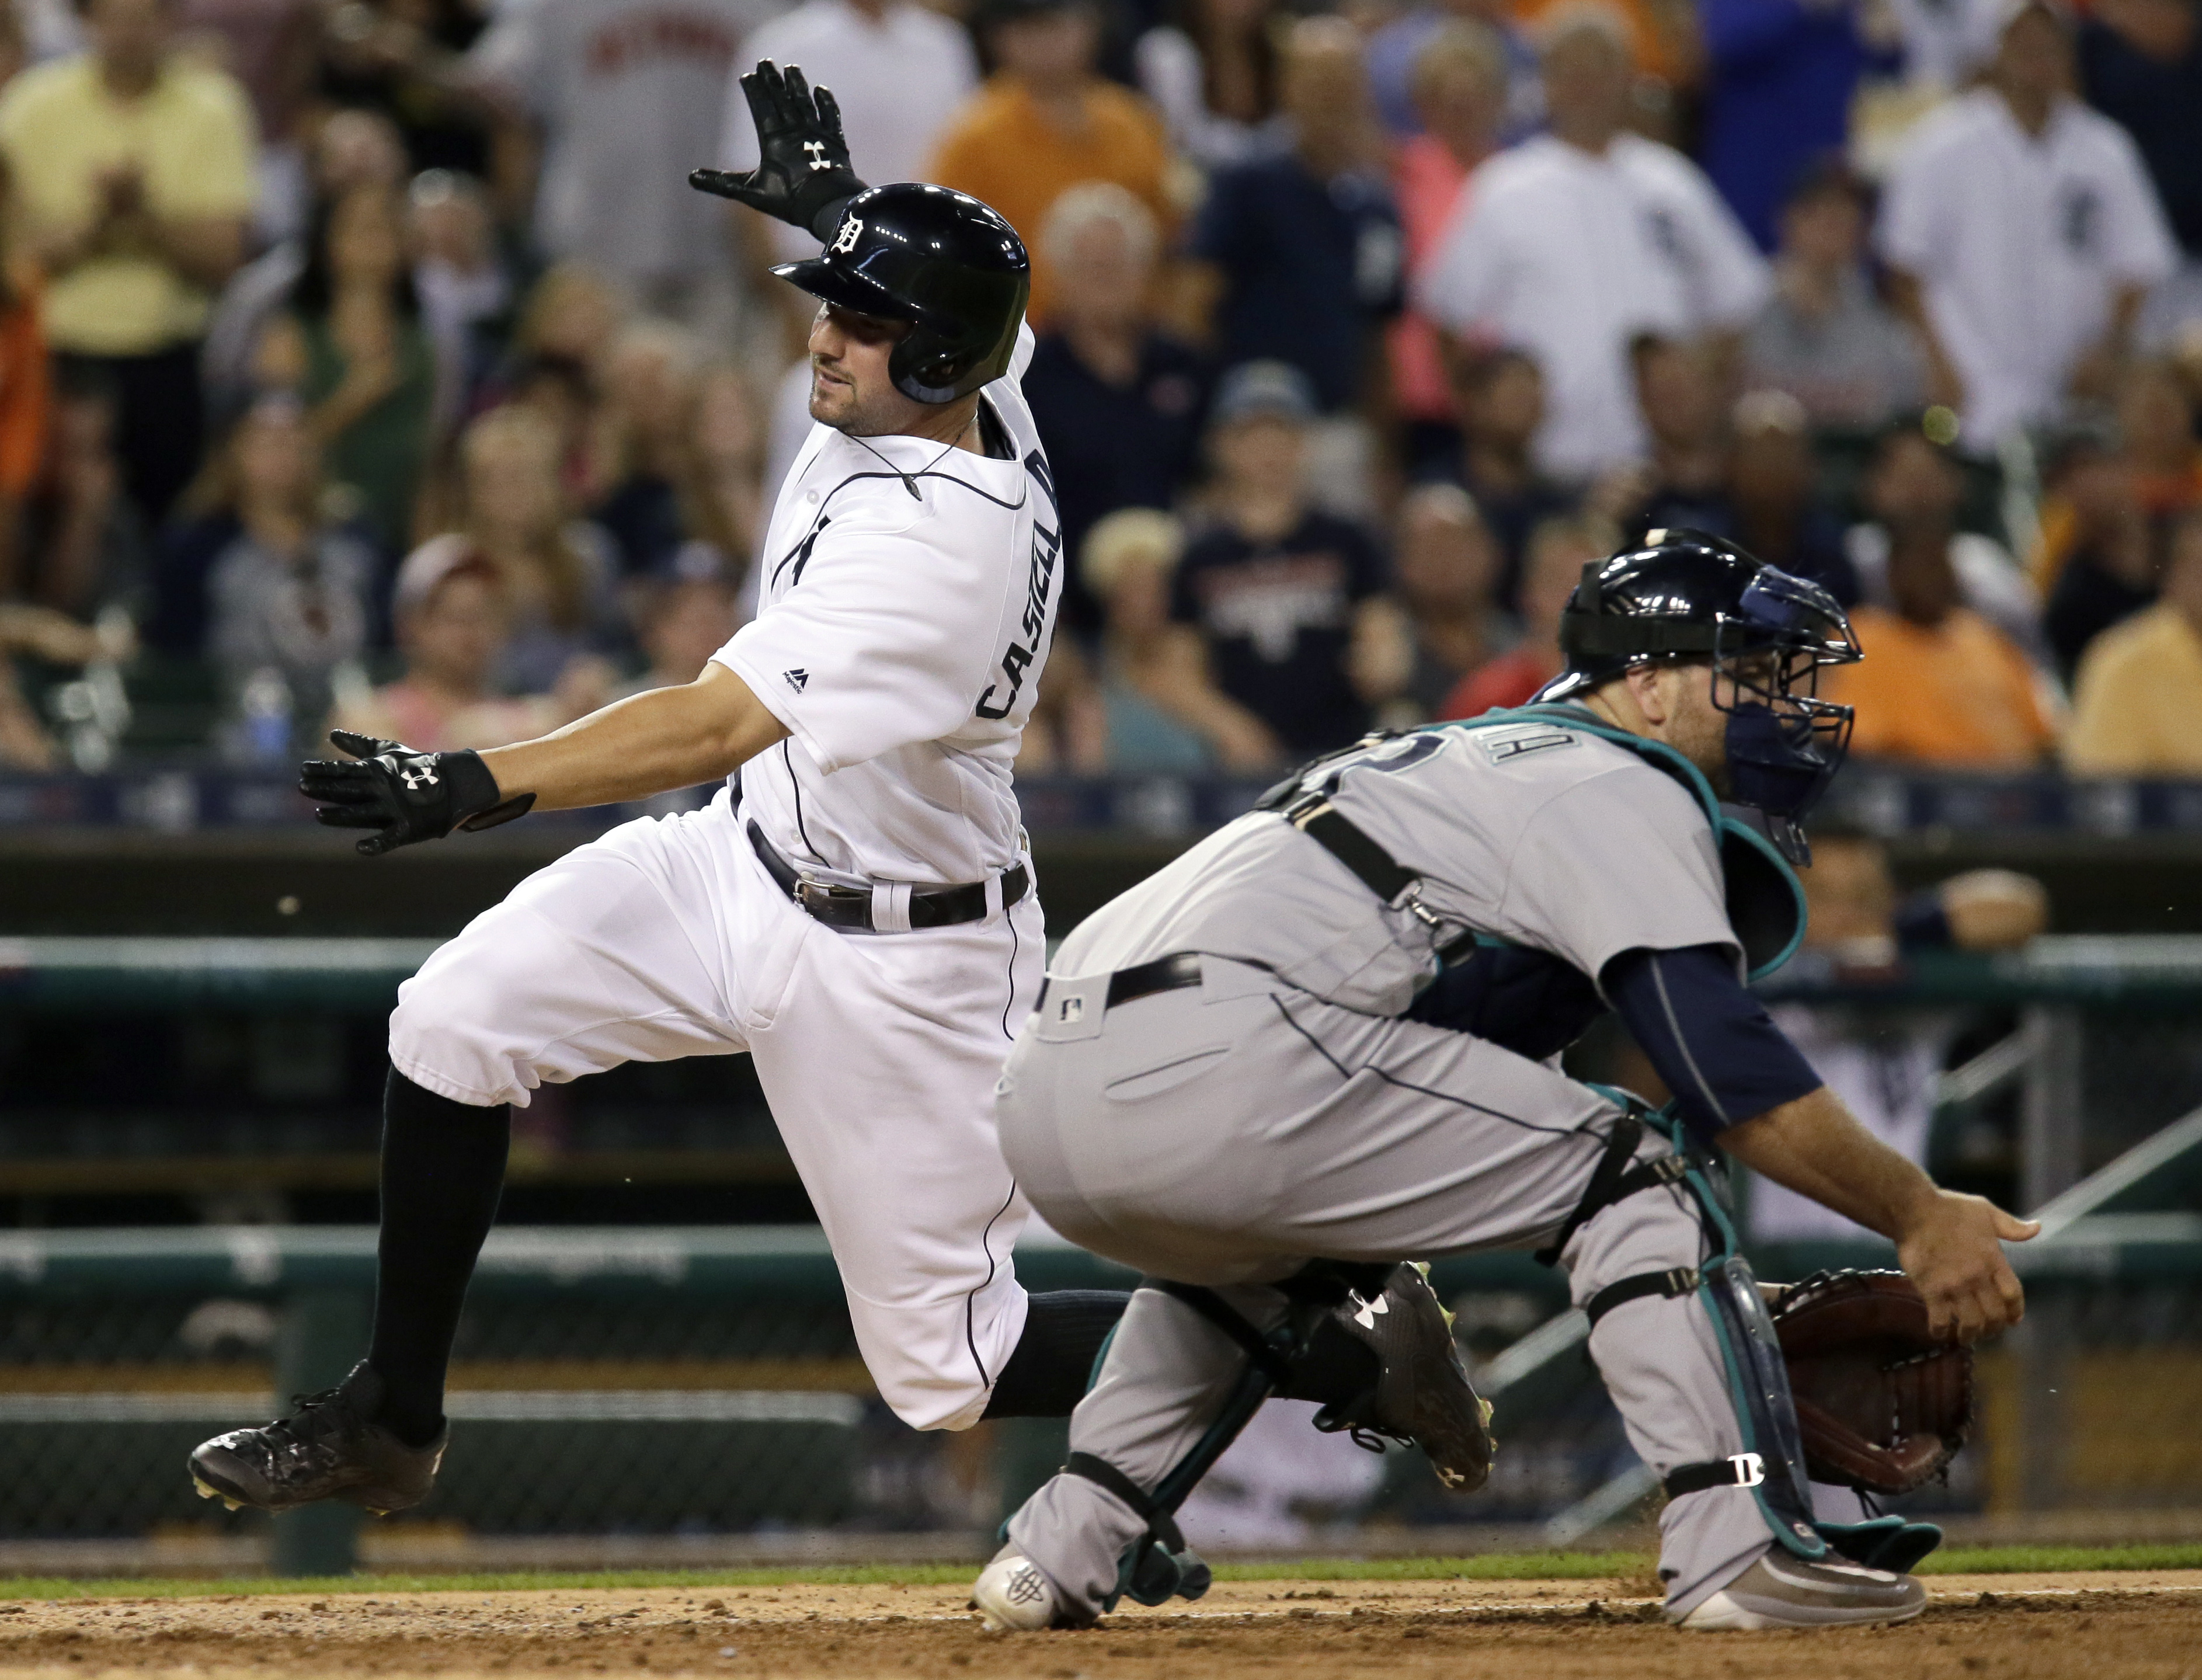 Nick Castellanos' Improved Speed Could Lead to a Breakout Season